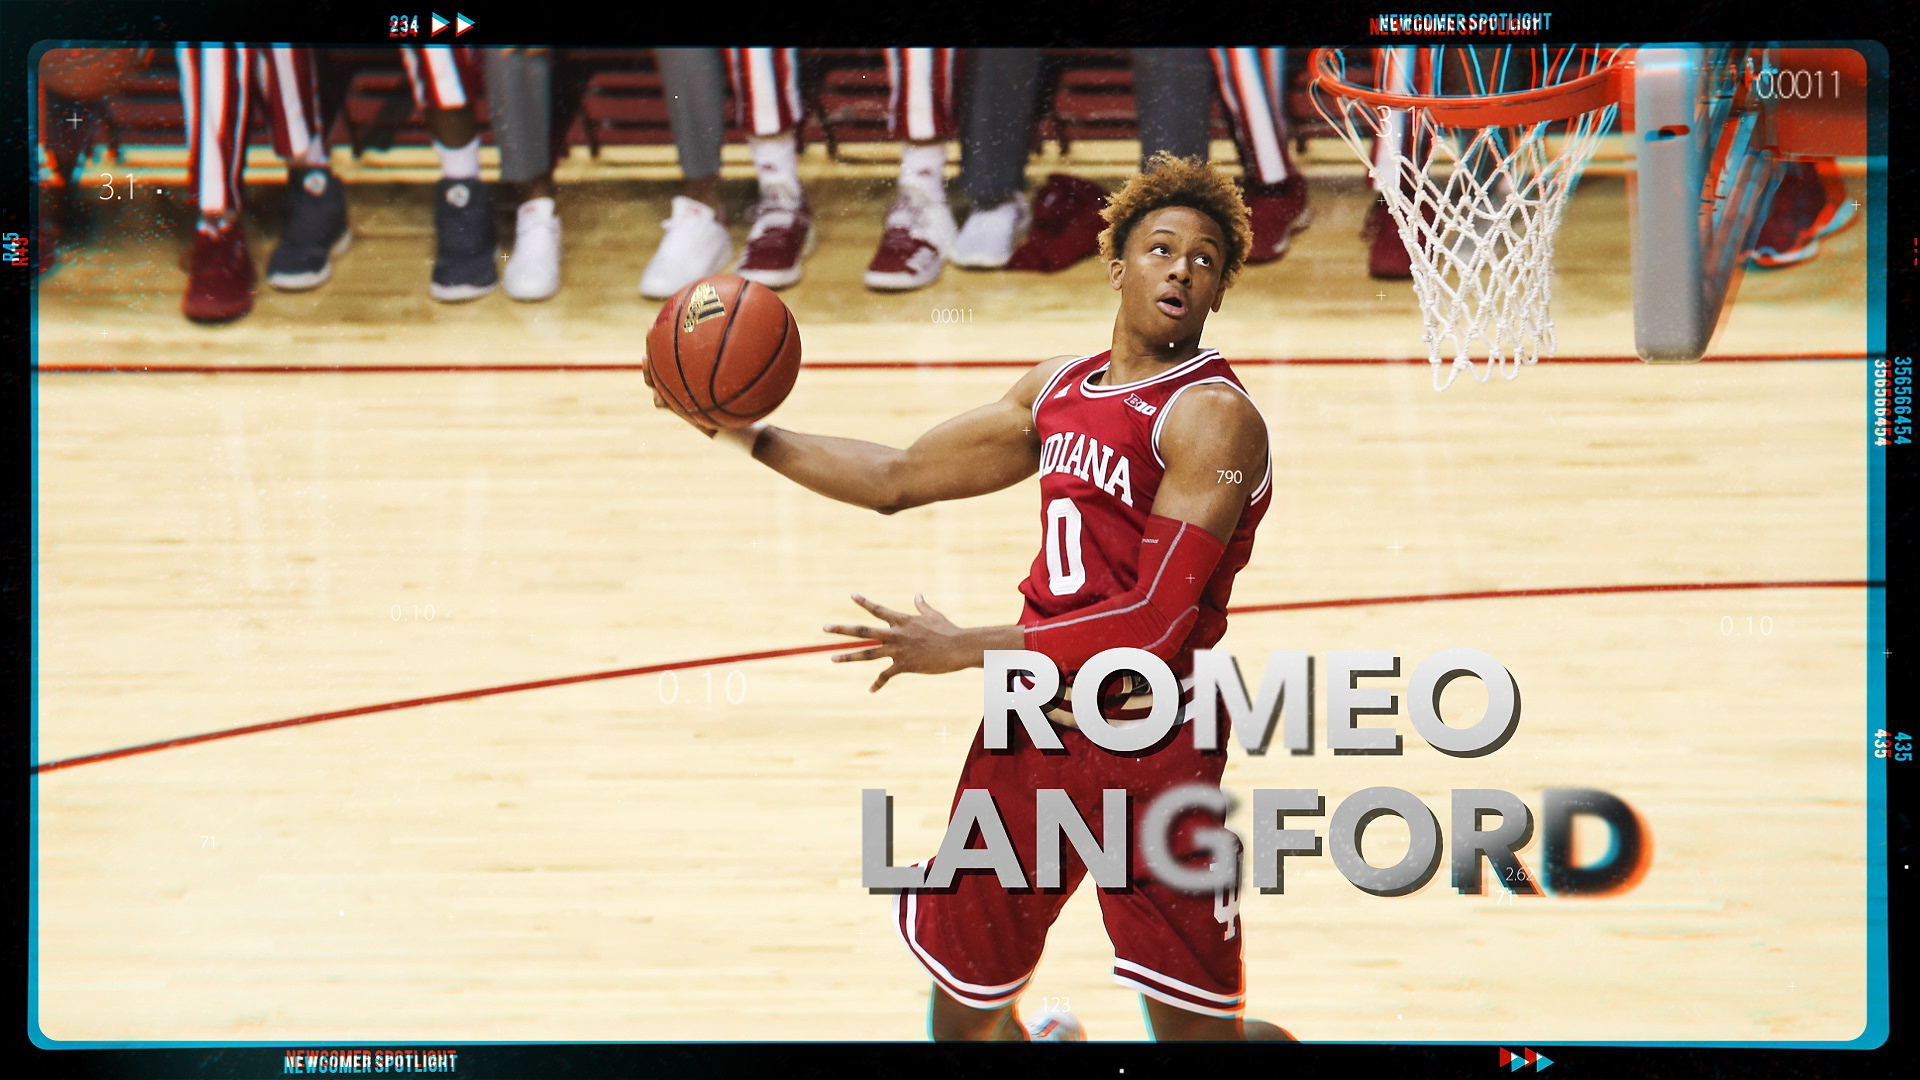 Indiana Has Its Romeo As Langford Is Set To Star For The Hoosiers